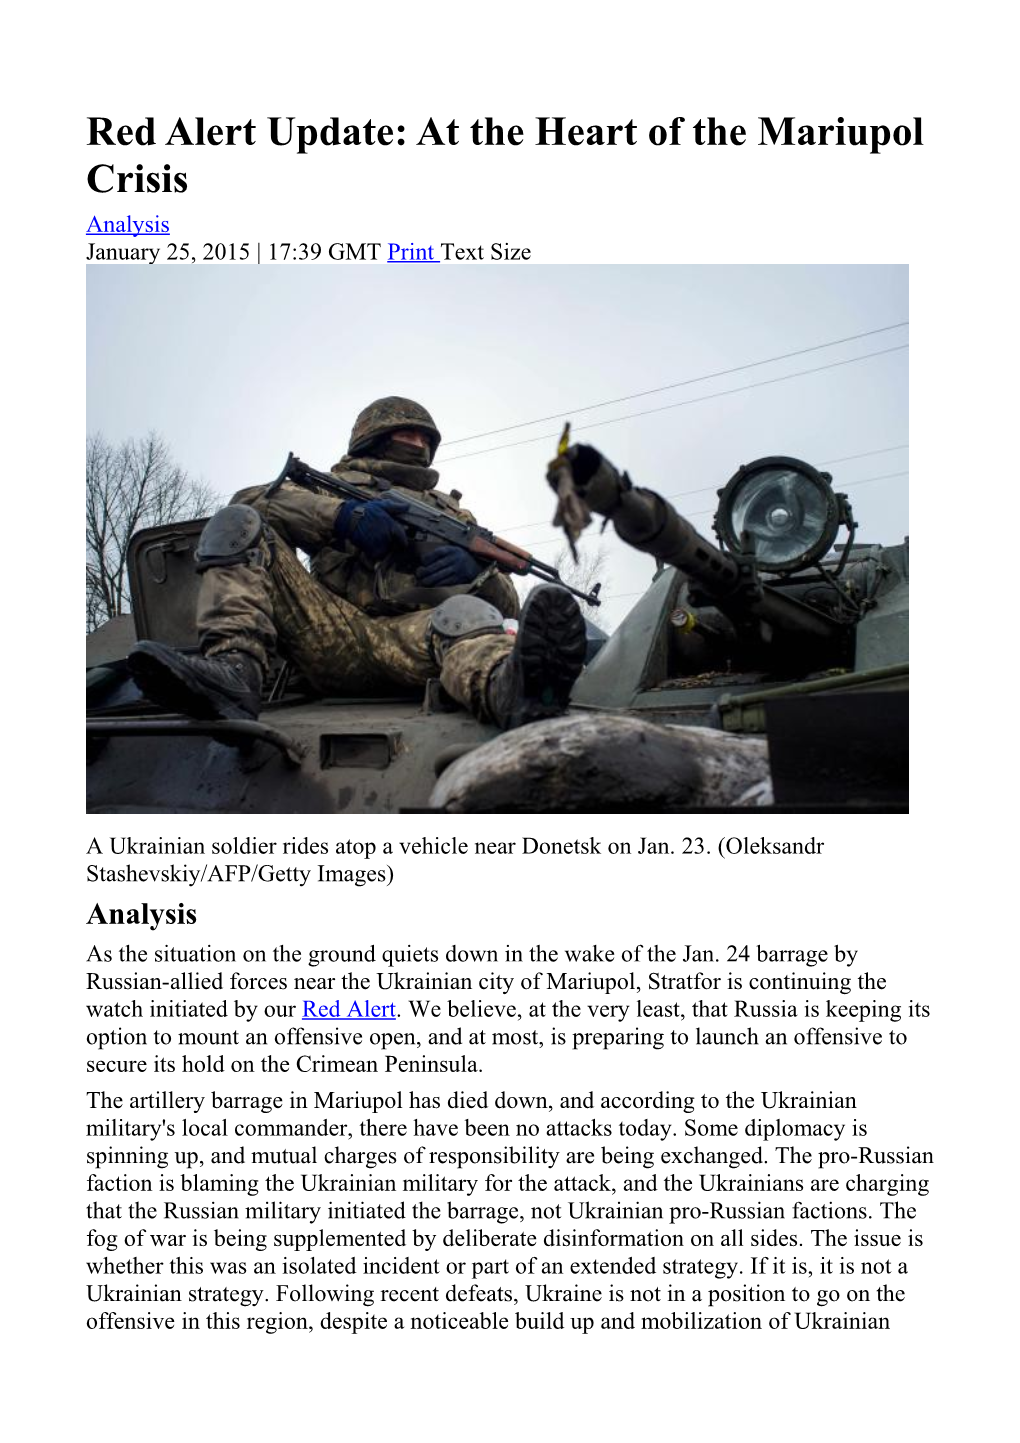 Red Alert Update: at the Heart of the Mariupol Crisis